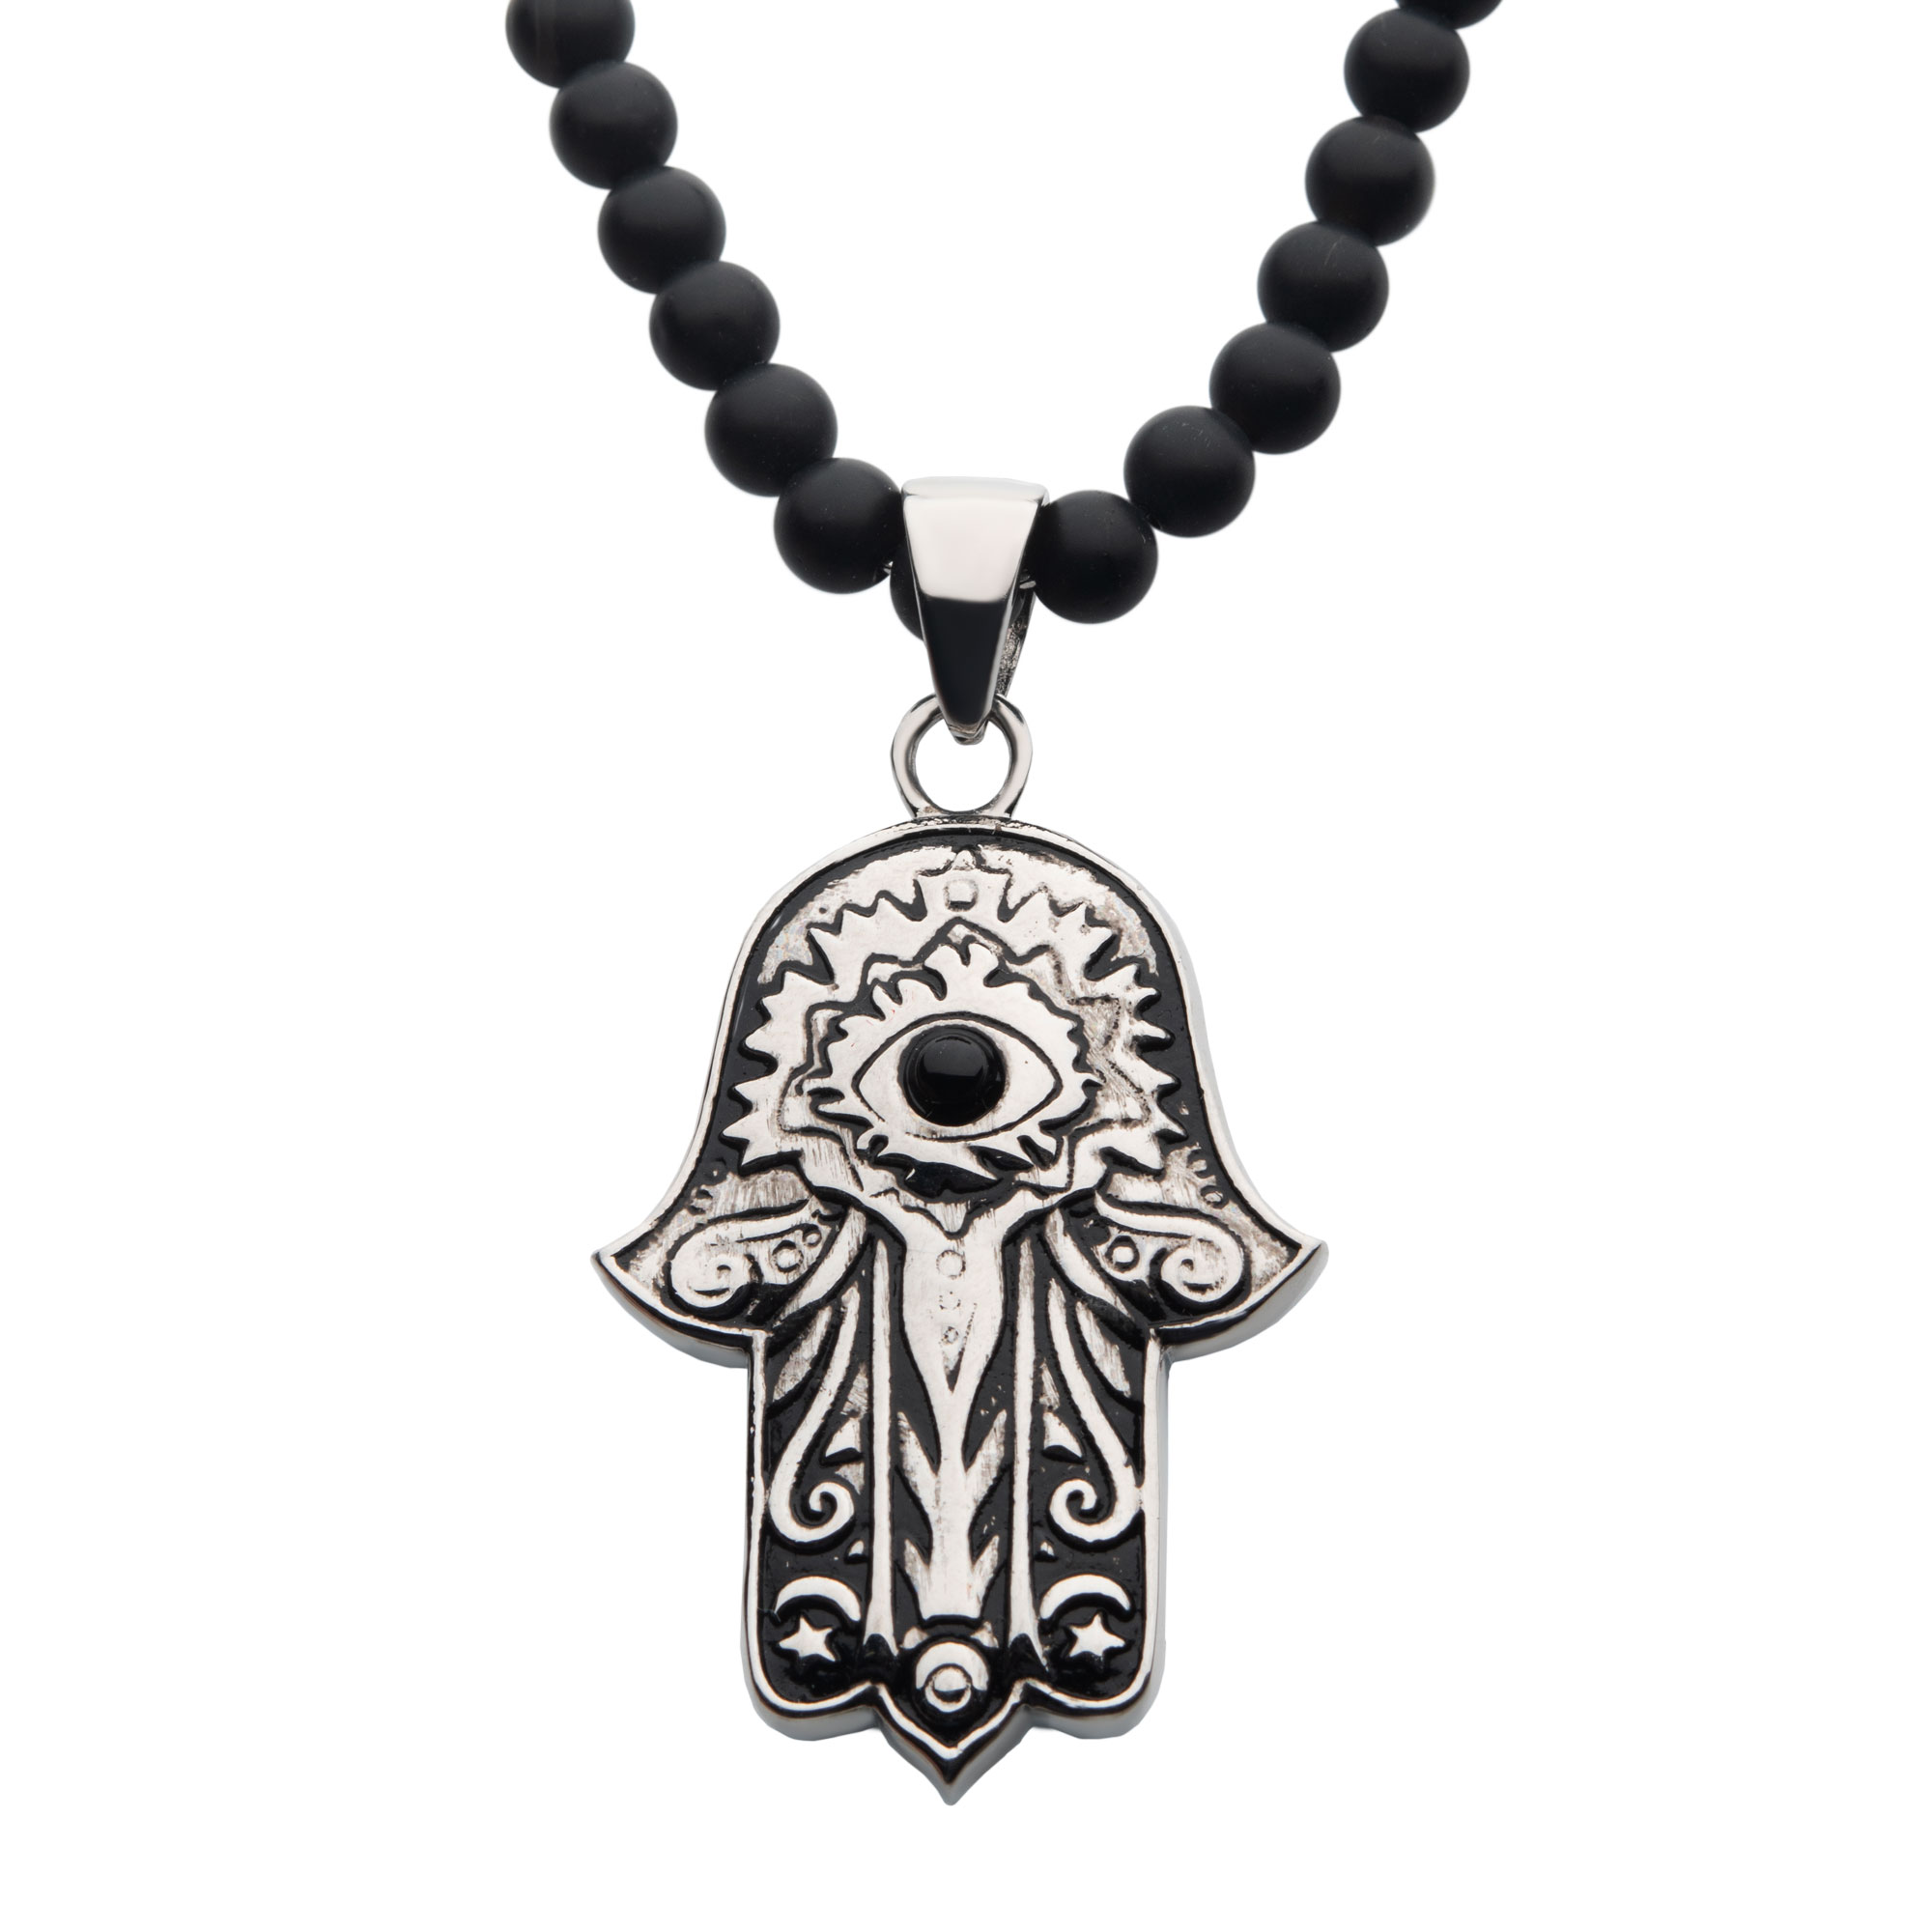 Stainless Steel with Centerpiece Black Agate Stone Hamsa Pendant, with Black Agate Stone Bead Necklace Milano Jewelers Pembroke Pines, FL